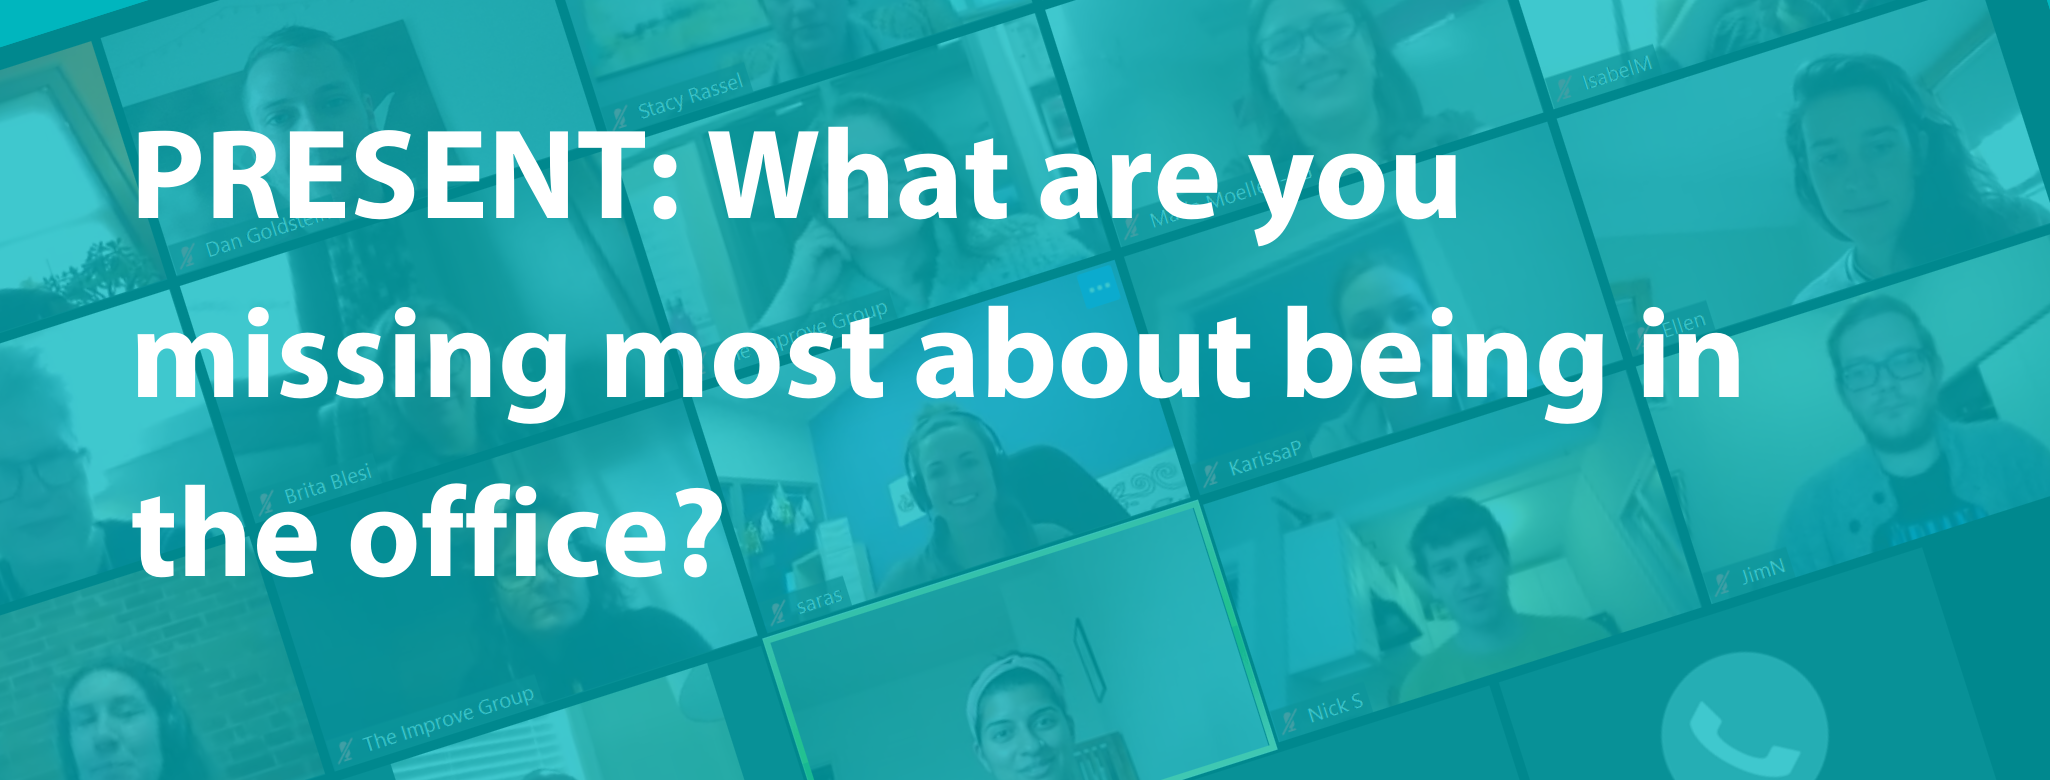 An image of white text on a teal background that asks "PRESENT: What are you missing most about being in the office?" and an image of all our team members on Zoom is located faintly in the background